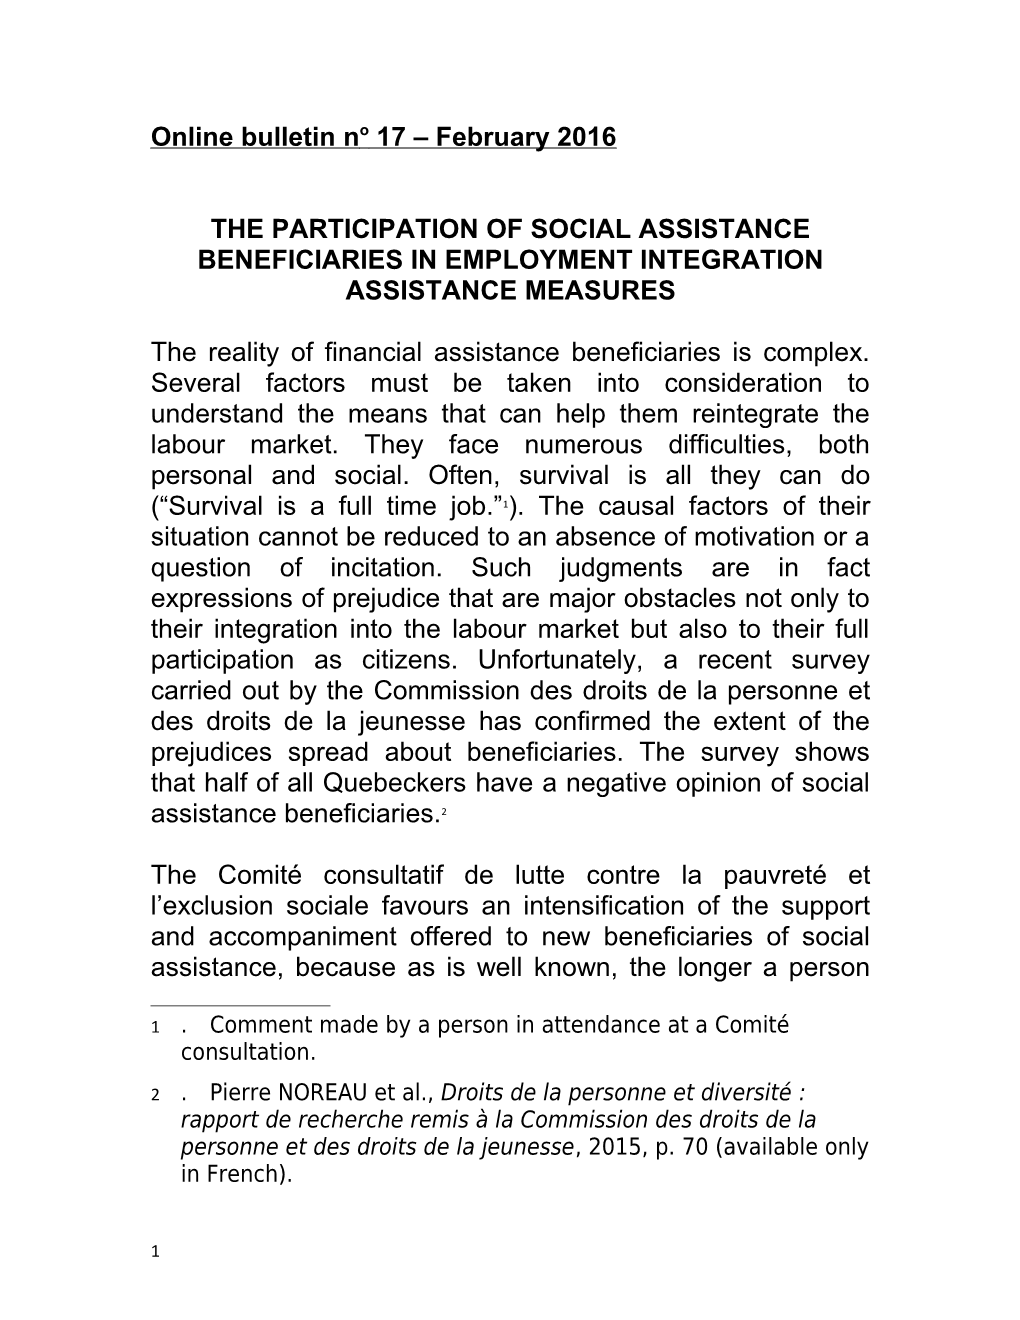 The Participation of Social Assistance Beneficiariesin Employment Integration Assistance